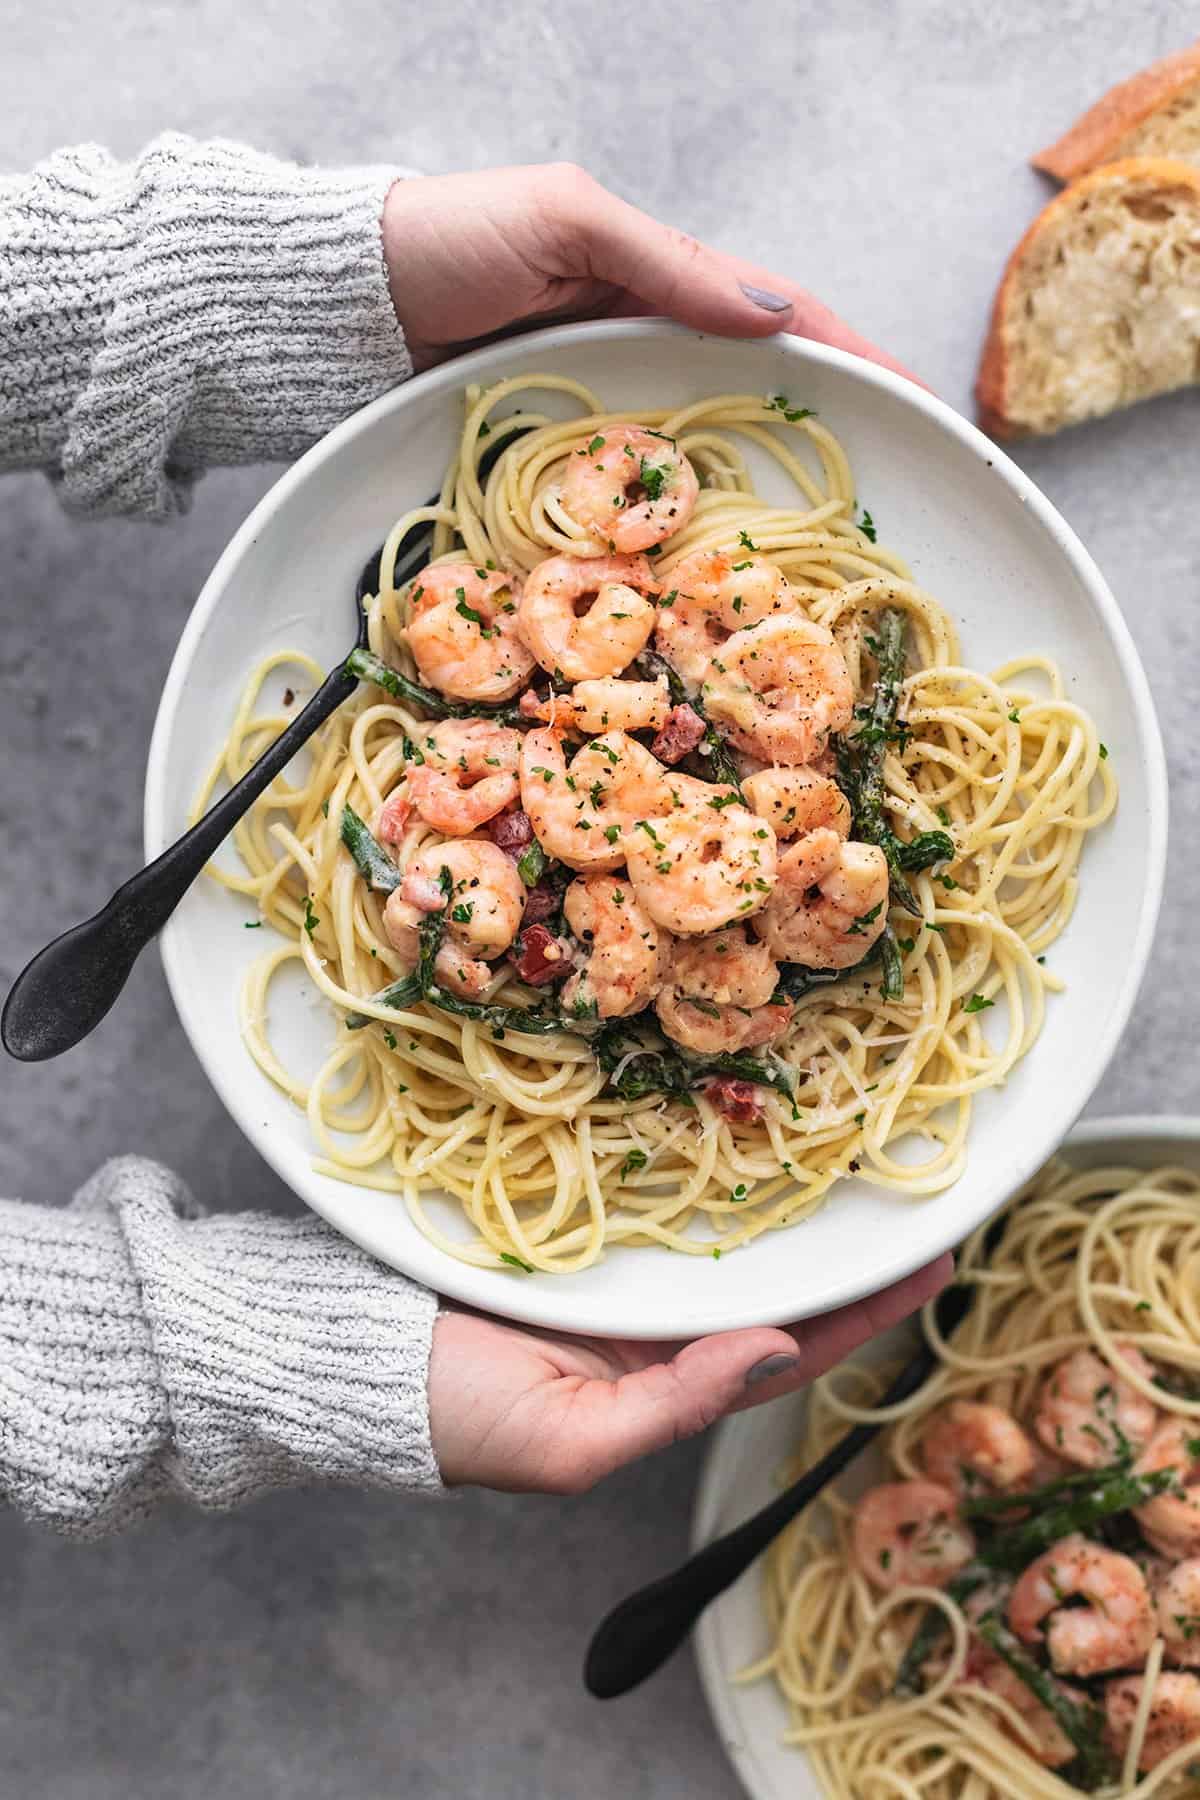 What Noodles To Use For Shrimp Scampi?